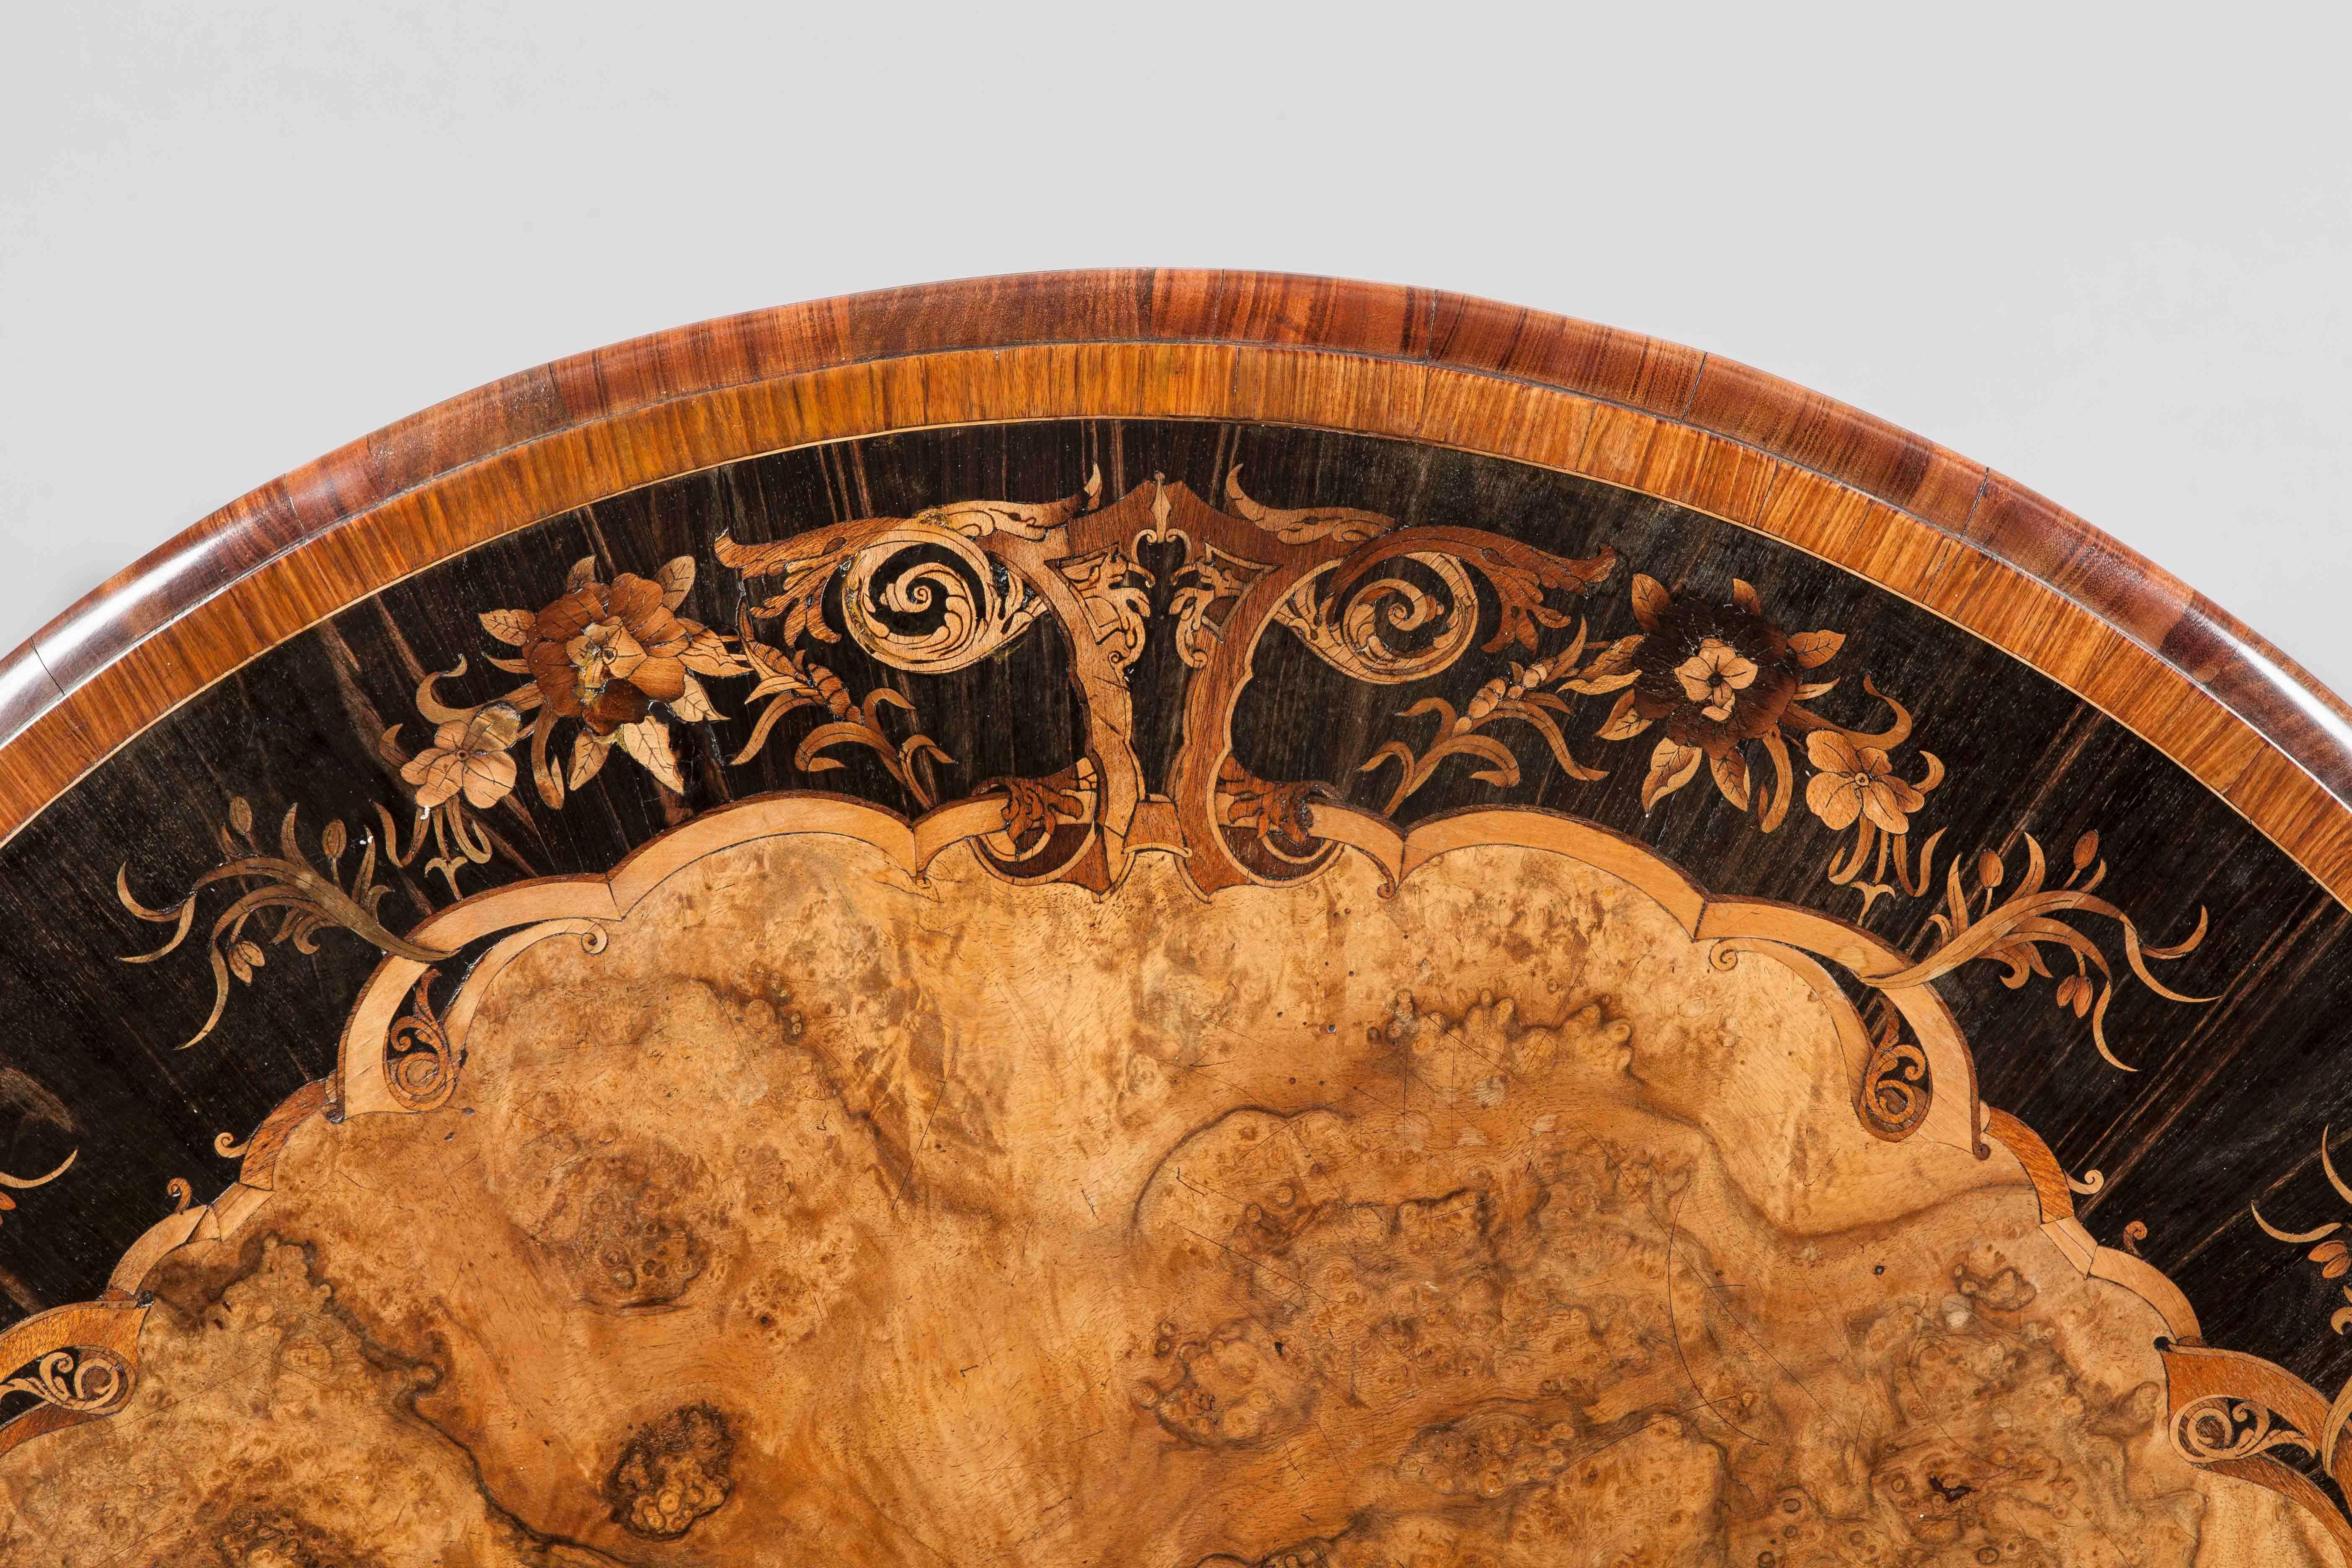 A Marquetry Centre Table by G.J. Morant
After a Design by Richard Bridgens

Constructed using Circassian walnut, with ebony, kingwood, and specimen woods utilised in the inlay work: the piece closely follows the Plate 16 design shown in Bridgen’s